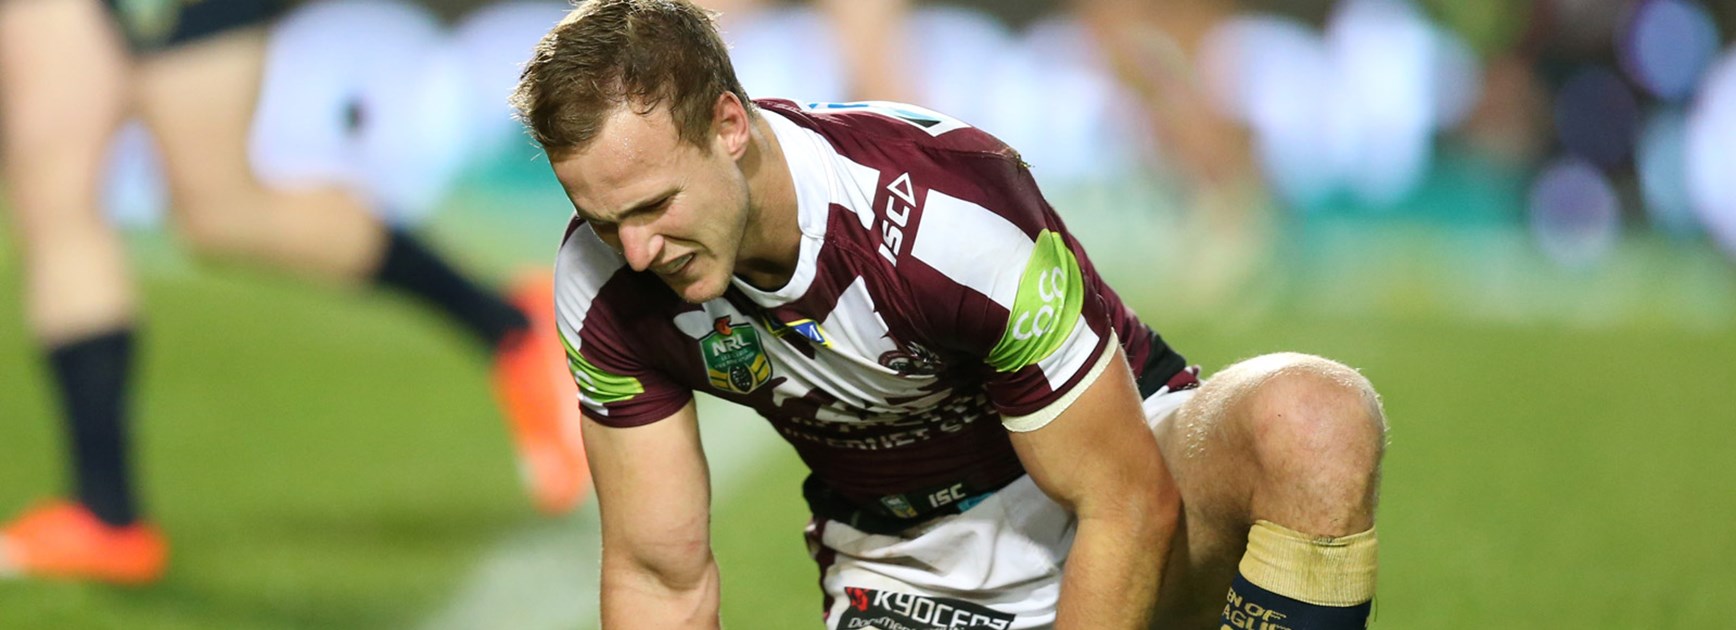 Sea Eagles halfback Daly Cherry-Evans was injured in his side's Round 19 clash with the Cowboys.